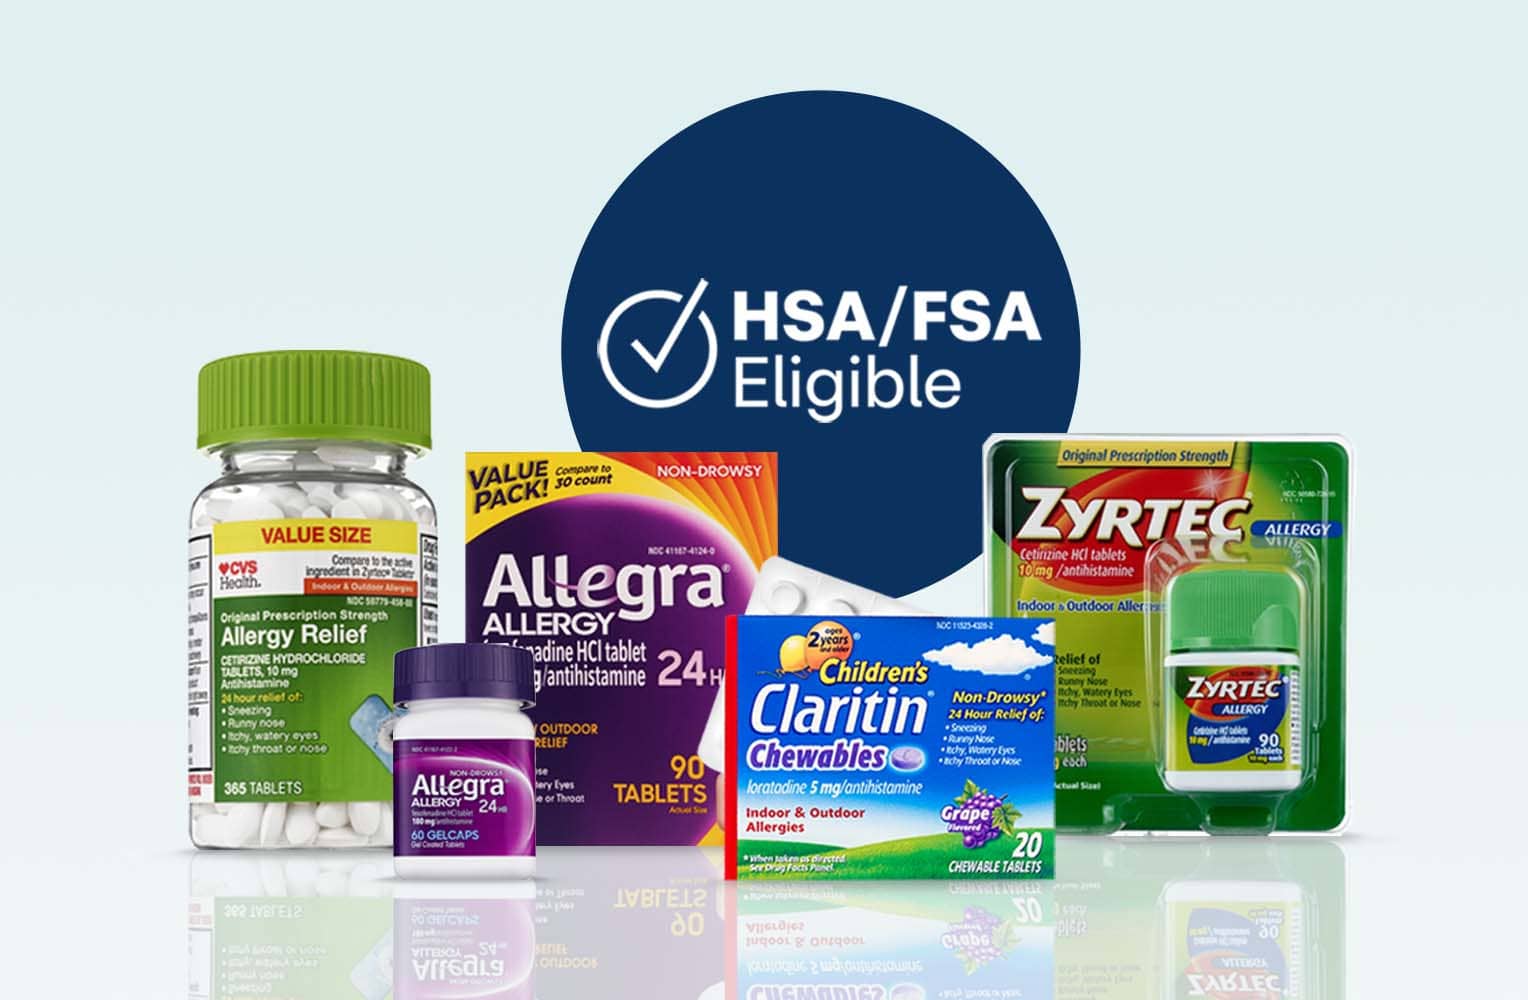 HSA/FSA eligible Allergy products